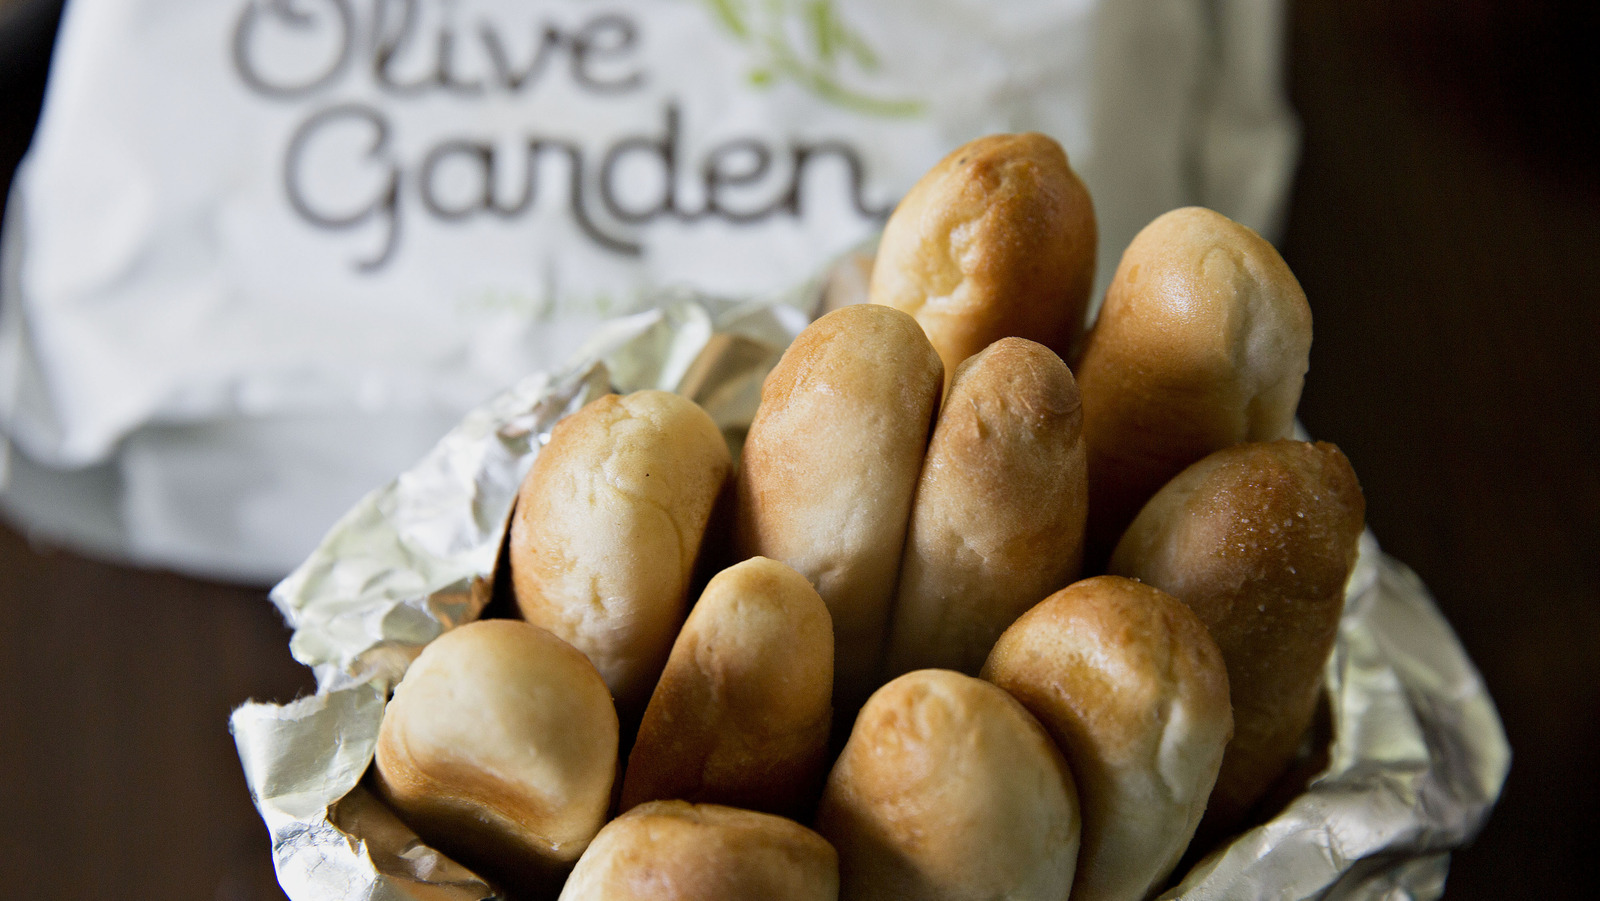 Why Olive Garden Is Failing in America